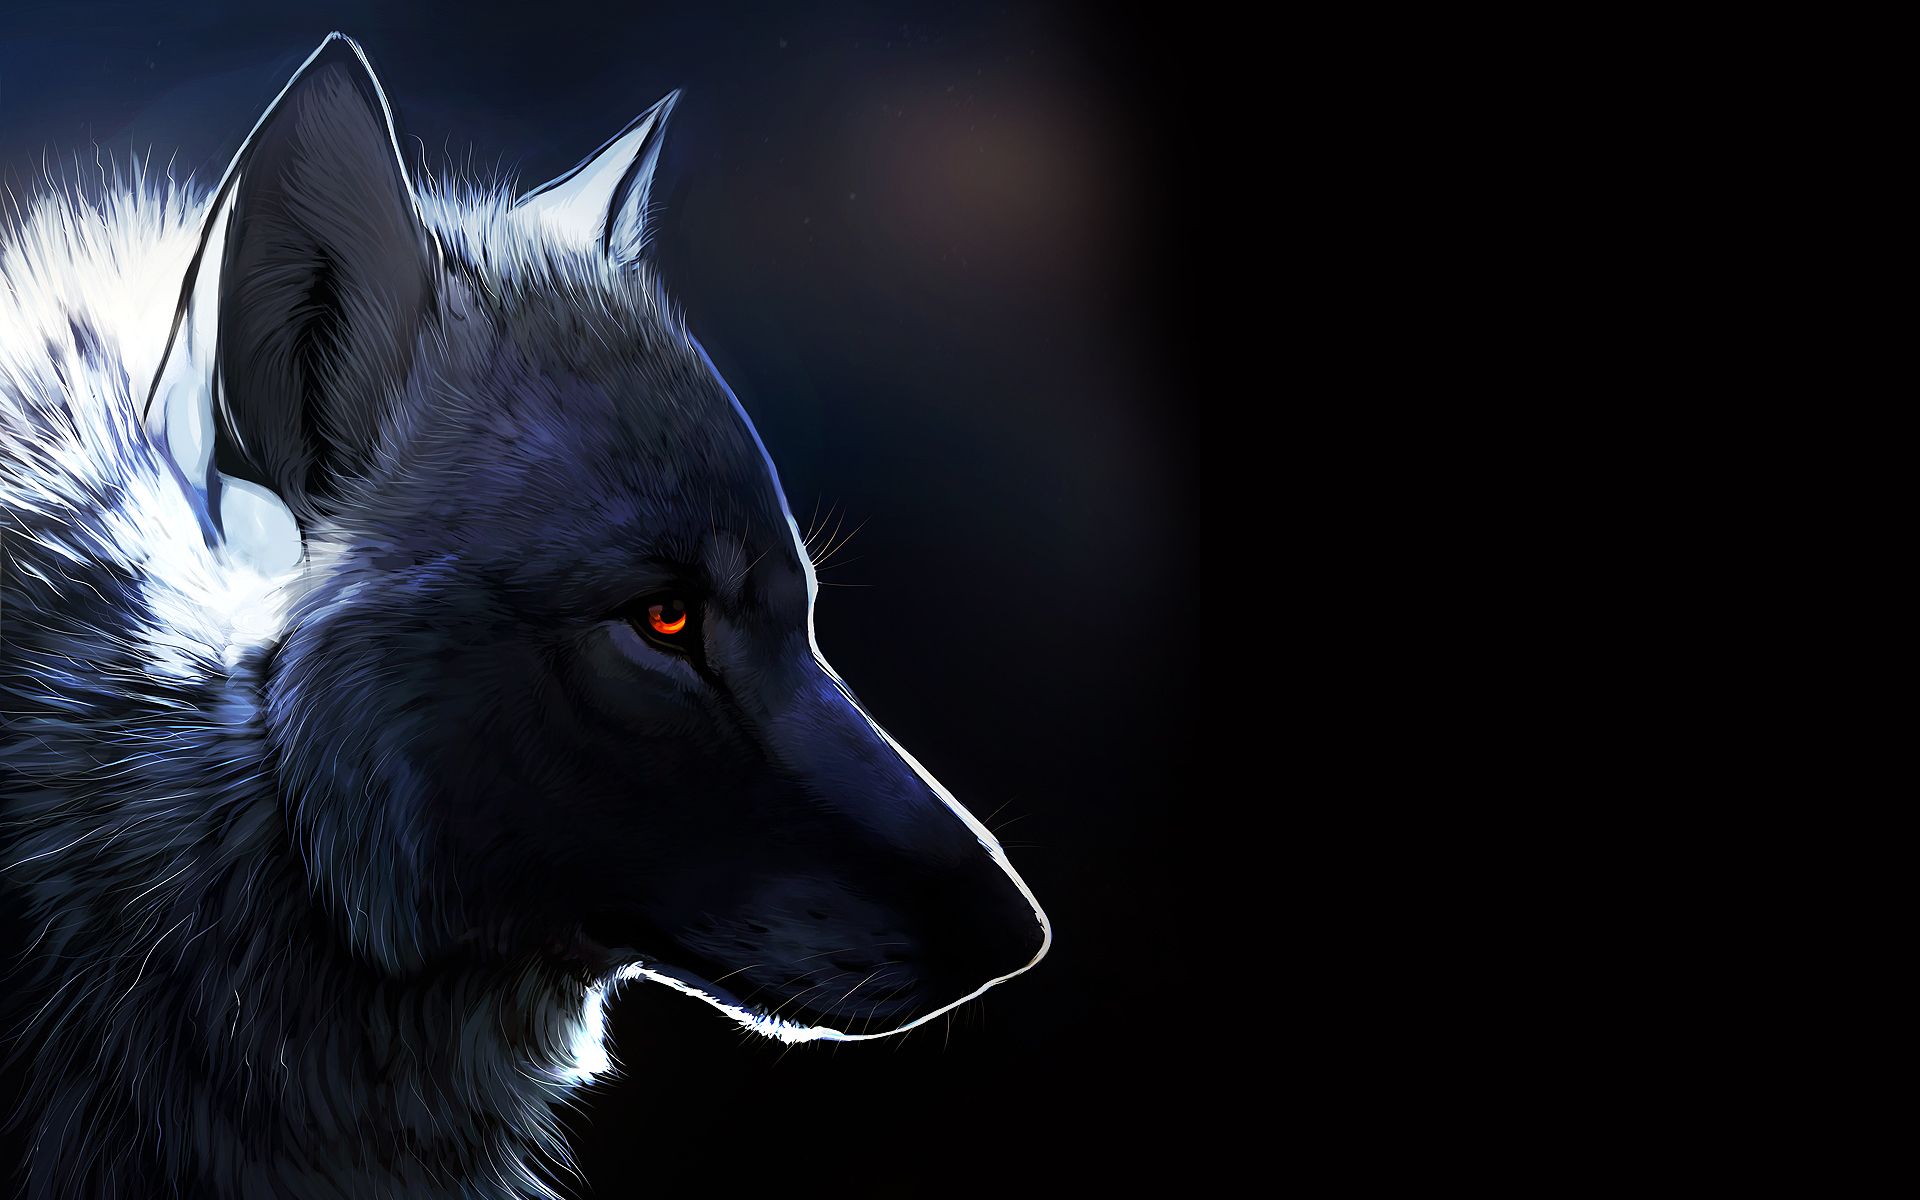 Wolf with glowing eyes wallpaper and image, picture, photo